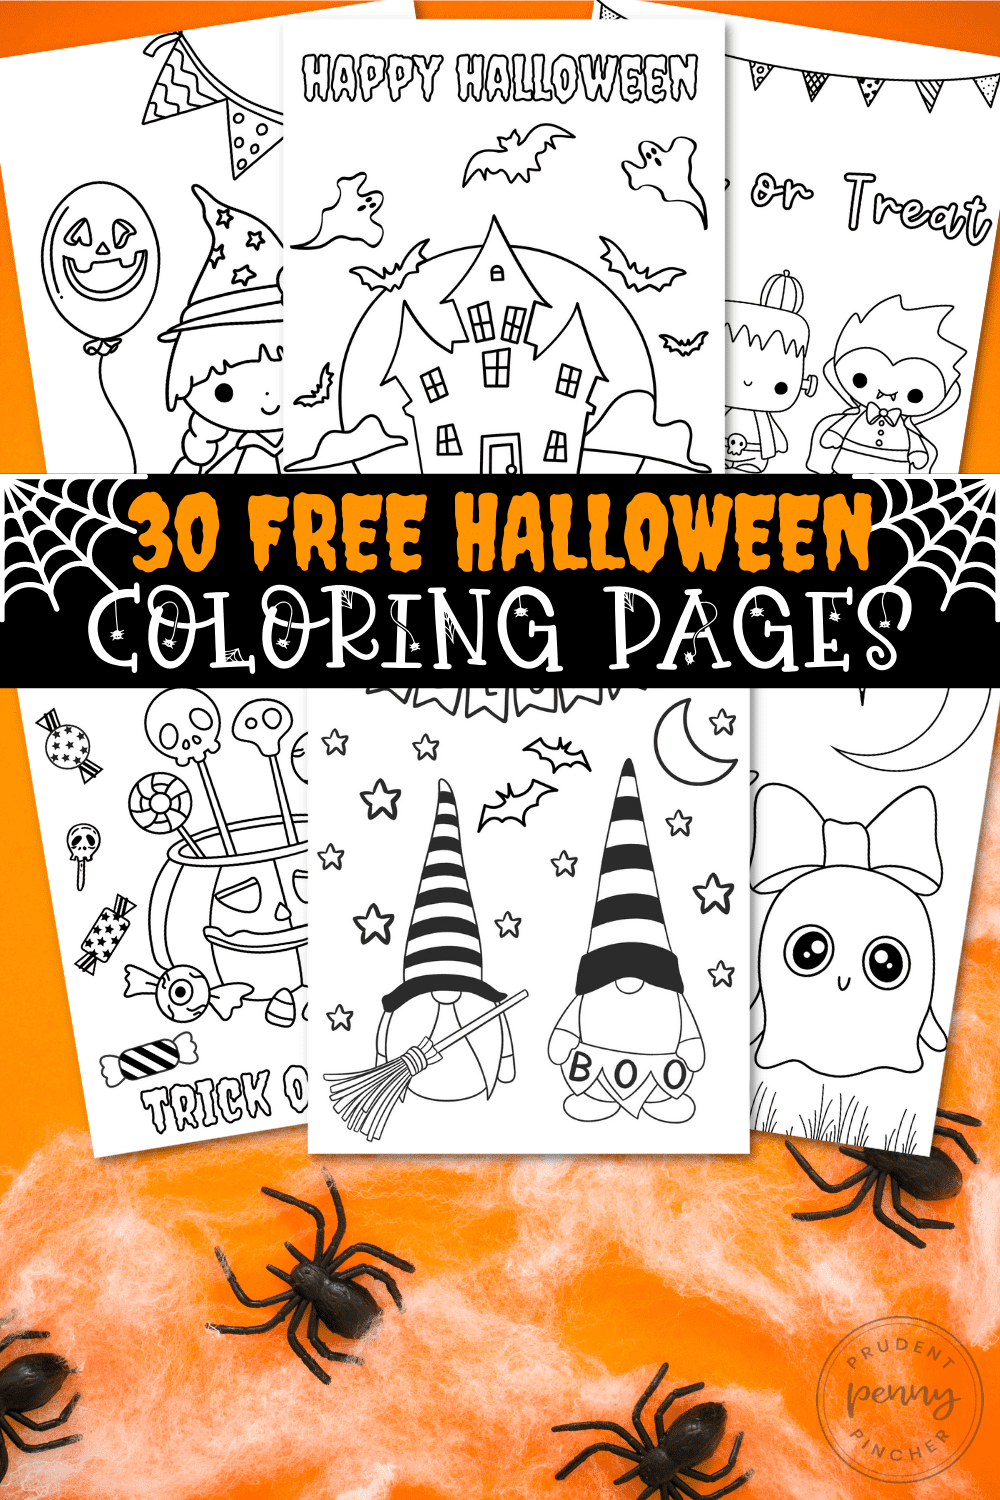 https://www.prudentpennypincher.com/wp-content/uploads/2022/07/30-halloween-coloring-pages.png